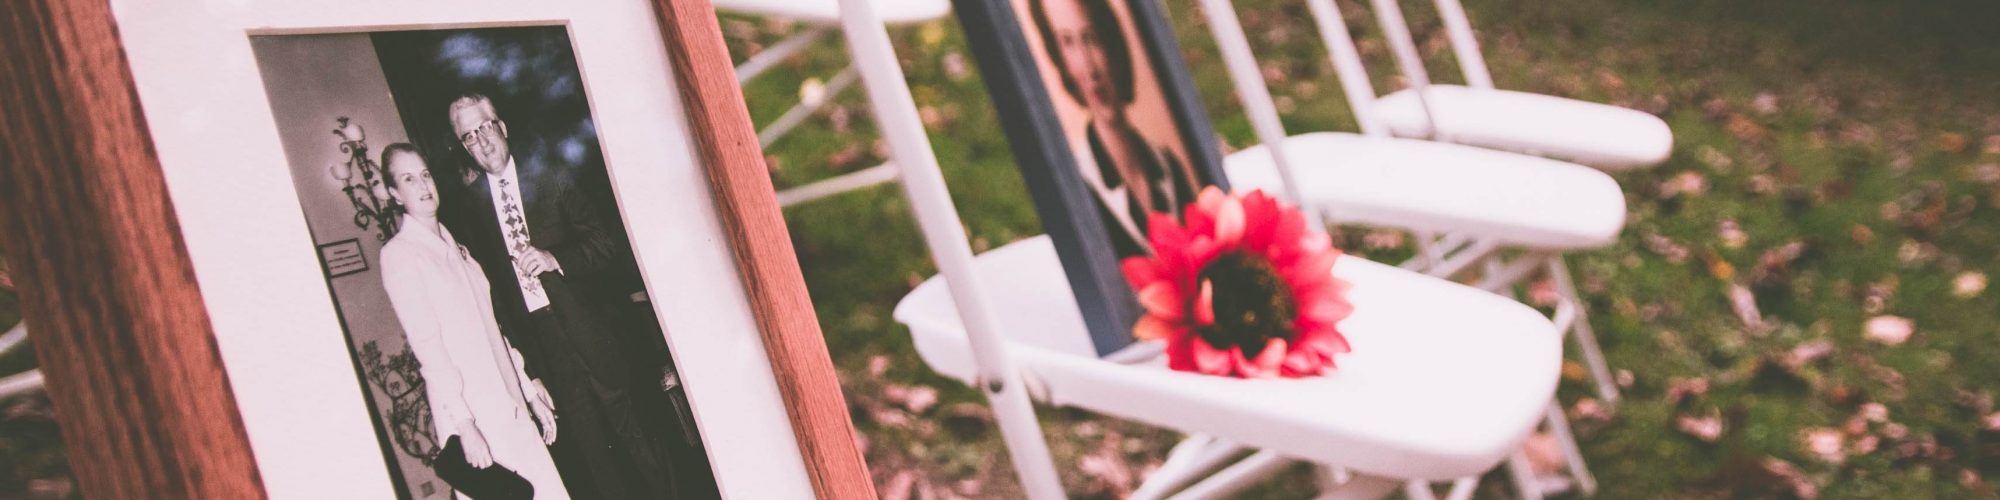 How to collect memorial tributes for deceased loved ones